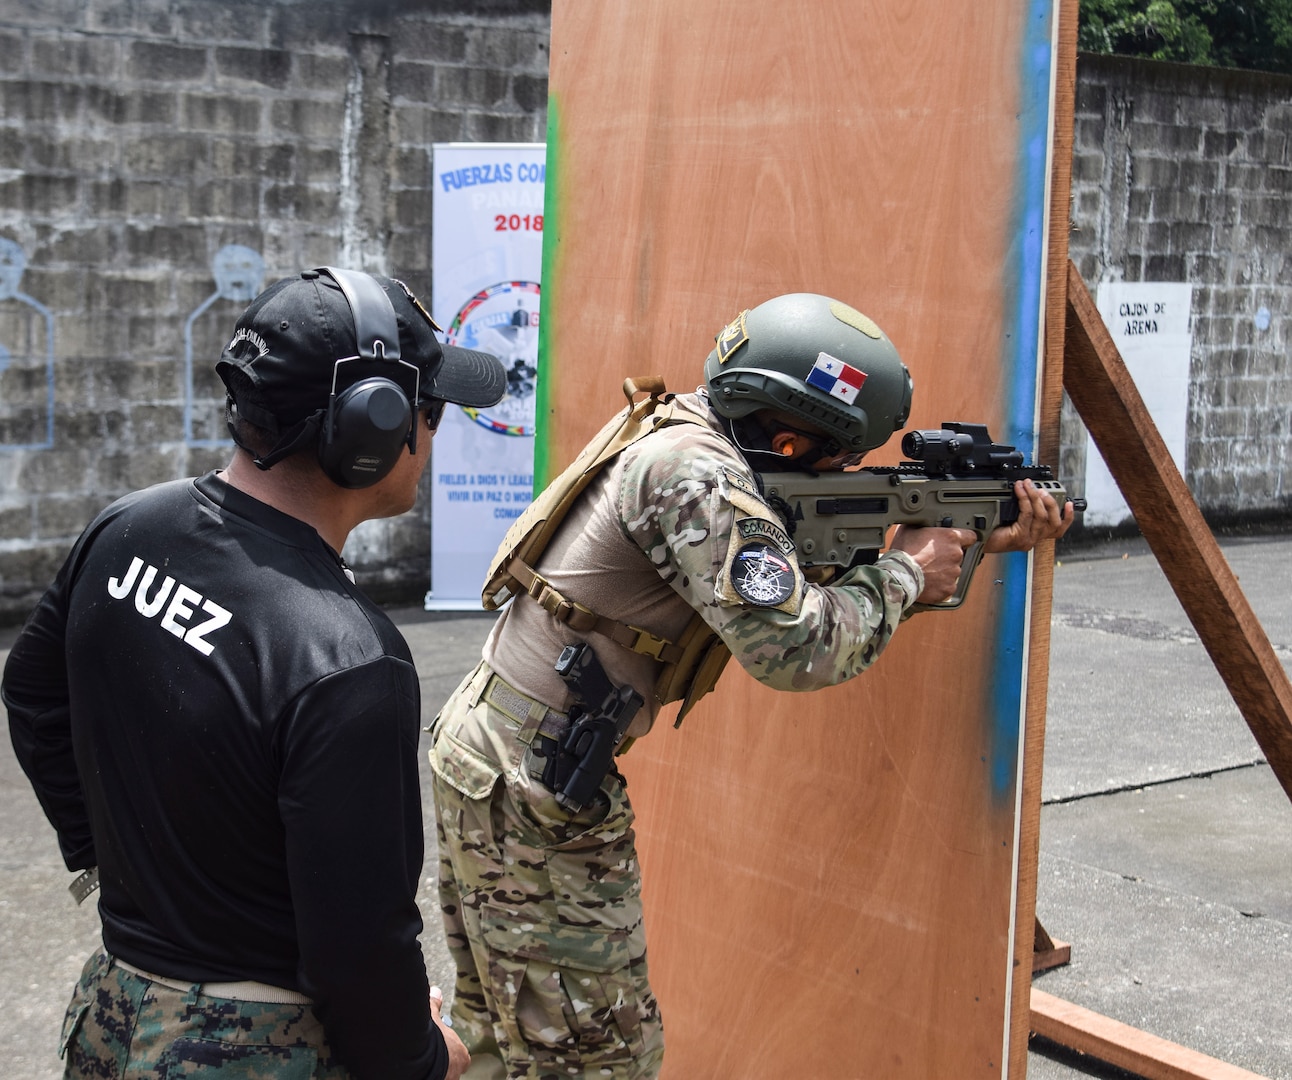 A Panamanian commando takes on an assault on a range during the Fuerzas Comando Competition at the Instituto Superior Policial, Panama, July 18, 2018. Army photo by Staff Sgt. Brian Ragin